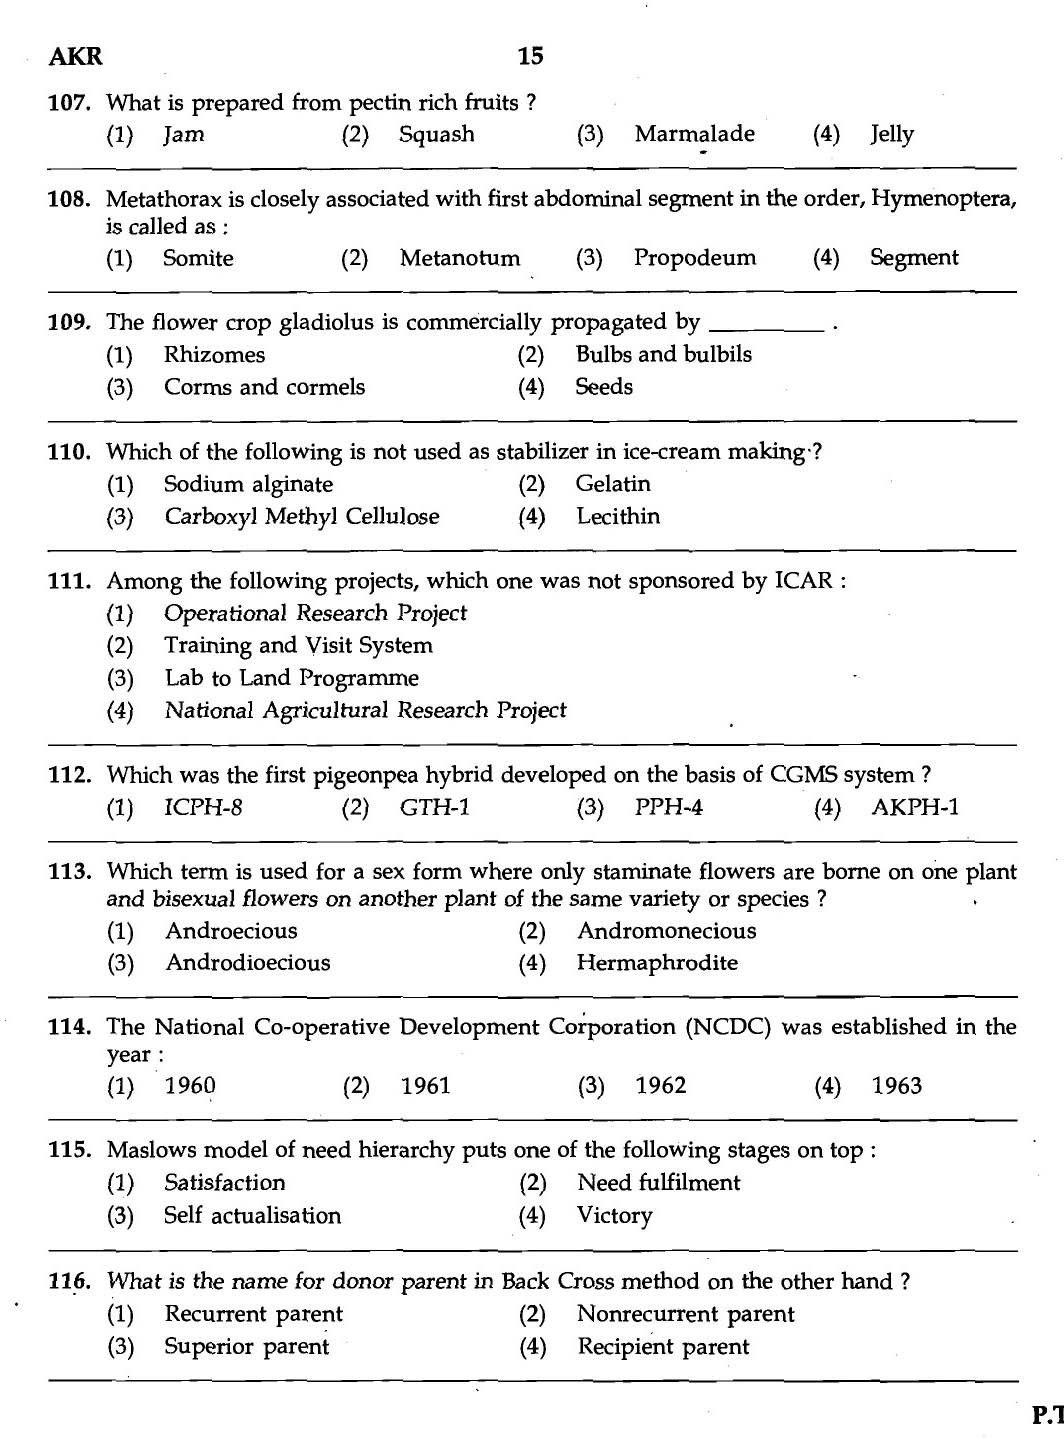 MPSC Agricultural Services Exam 2007 Question Paper Agriculture 13